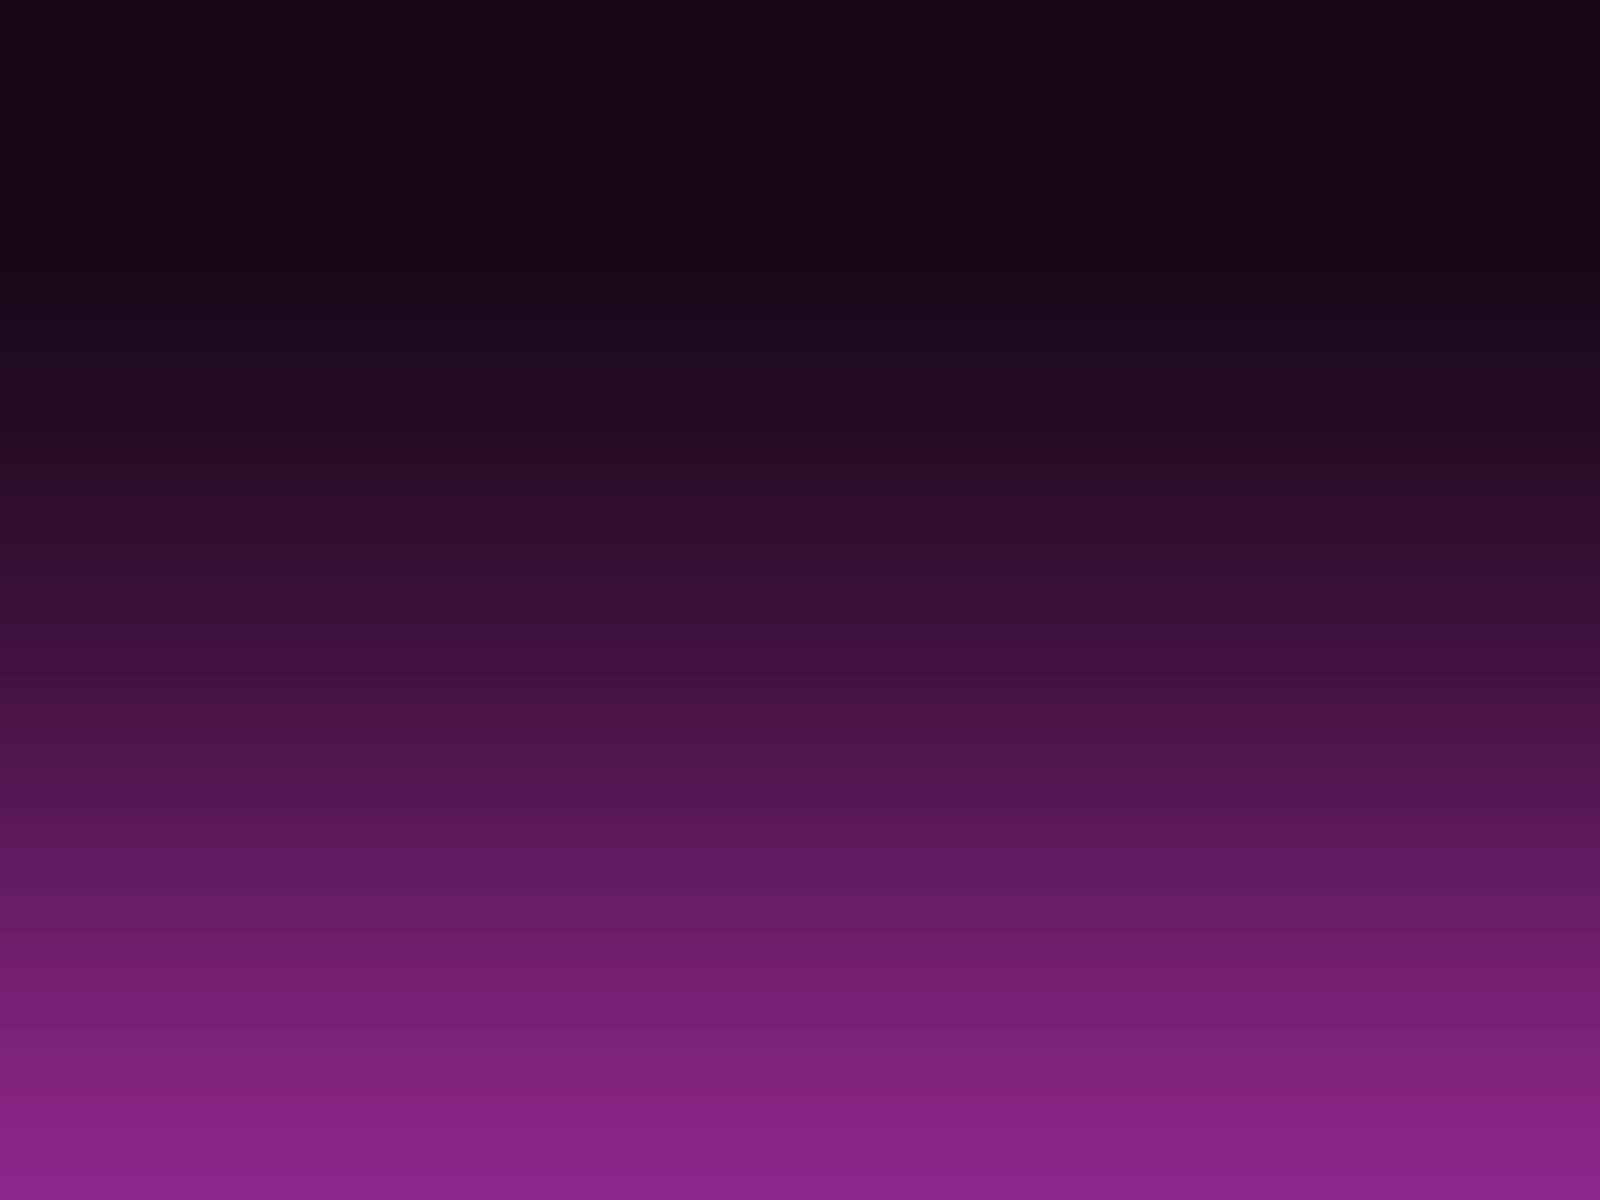 Download Simple Purple Backgrounds 5902 1600x1200 px High ...